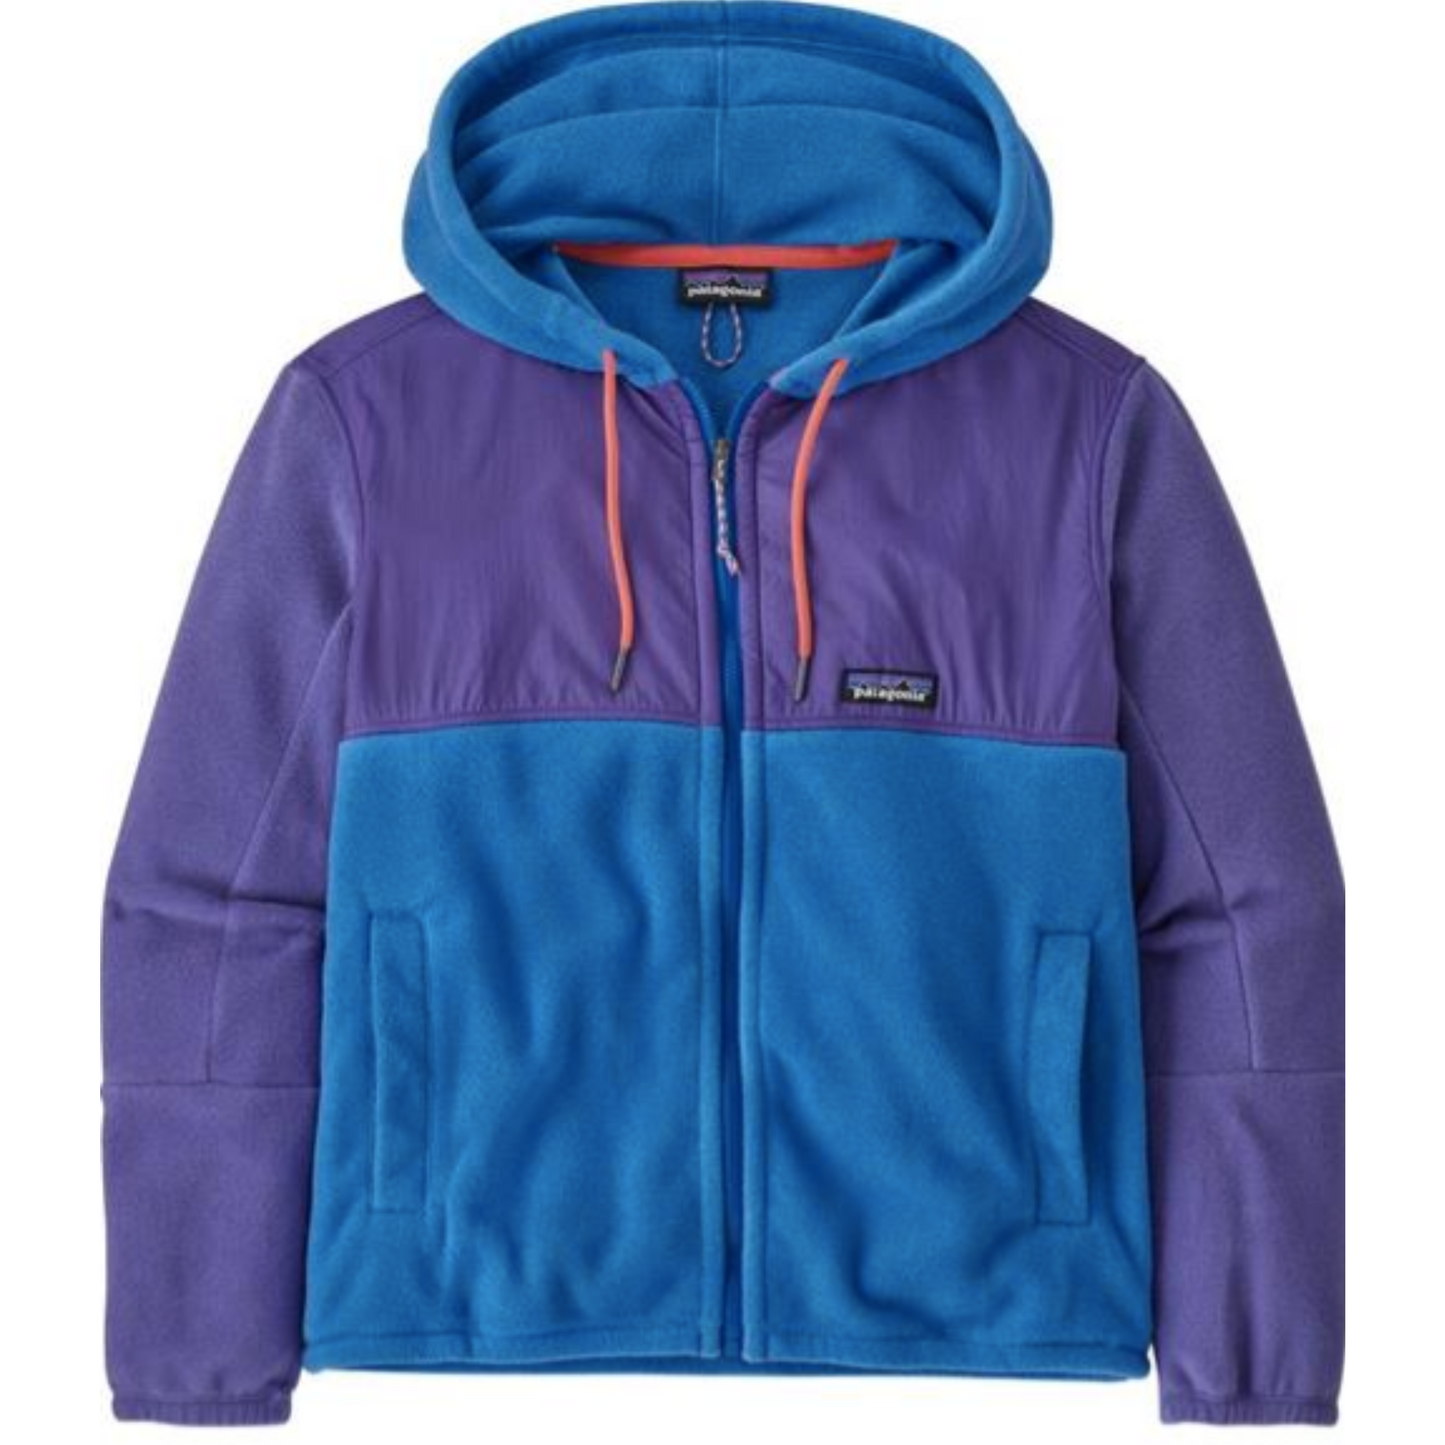 Patagonia Women's Microdini Hoody in Bayou Blue, front picture